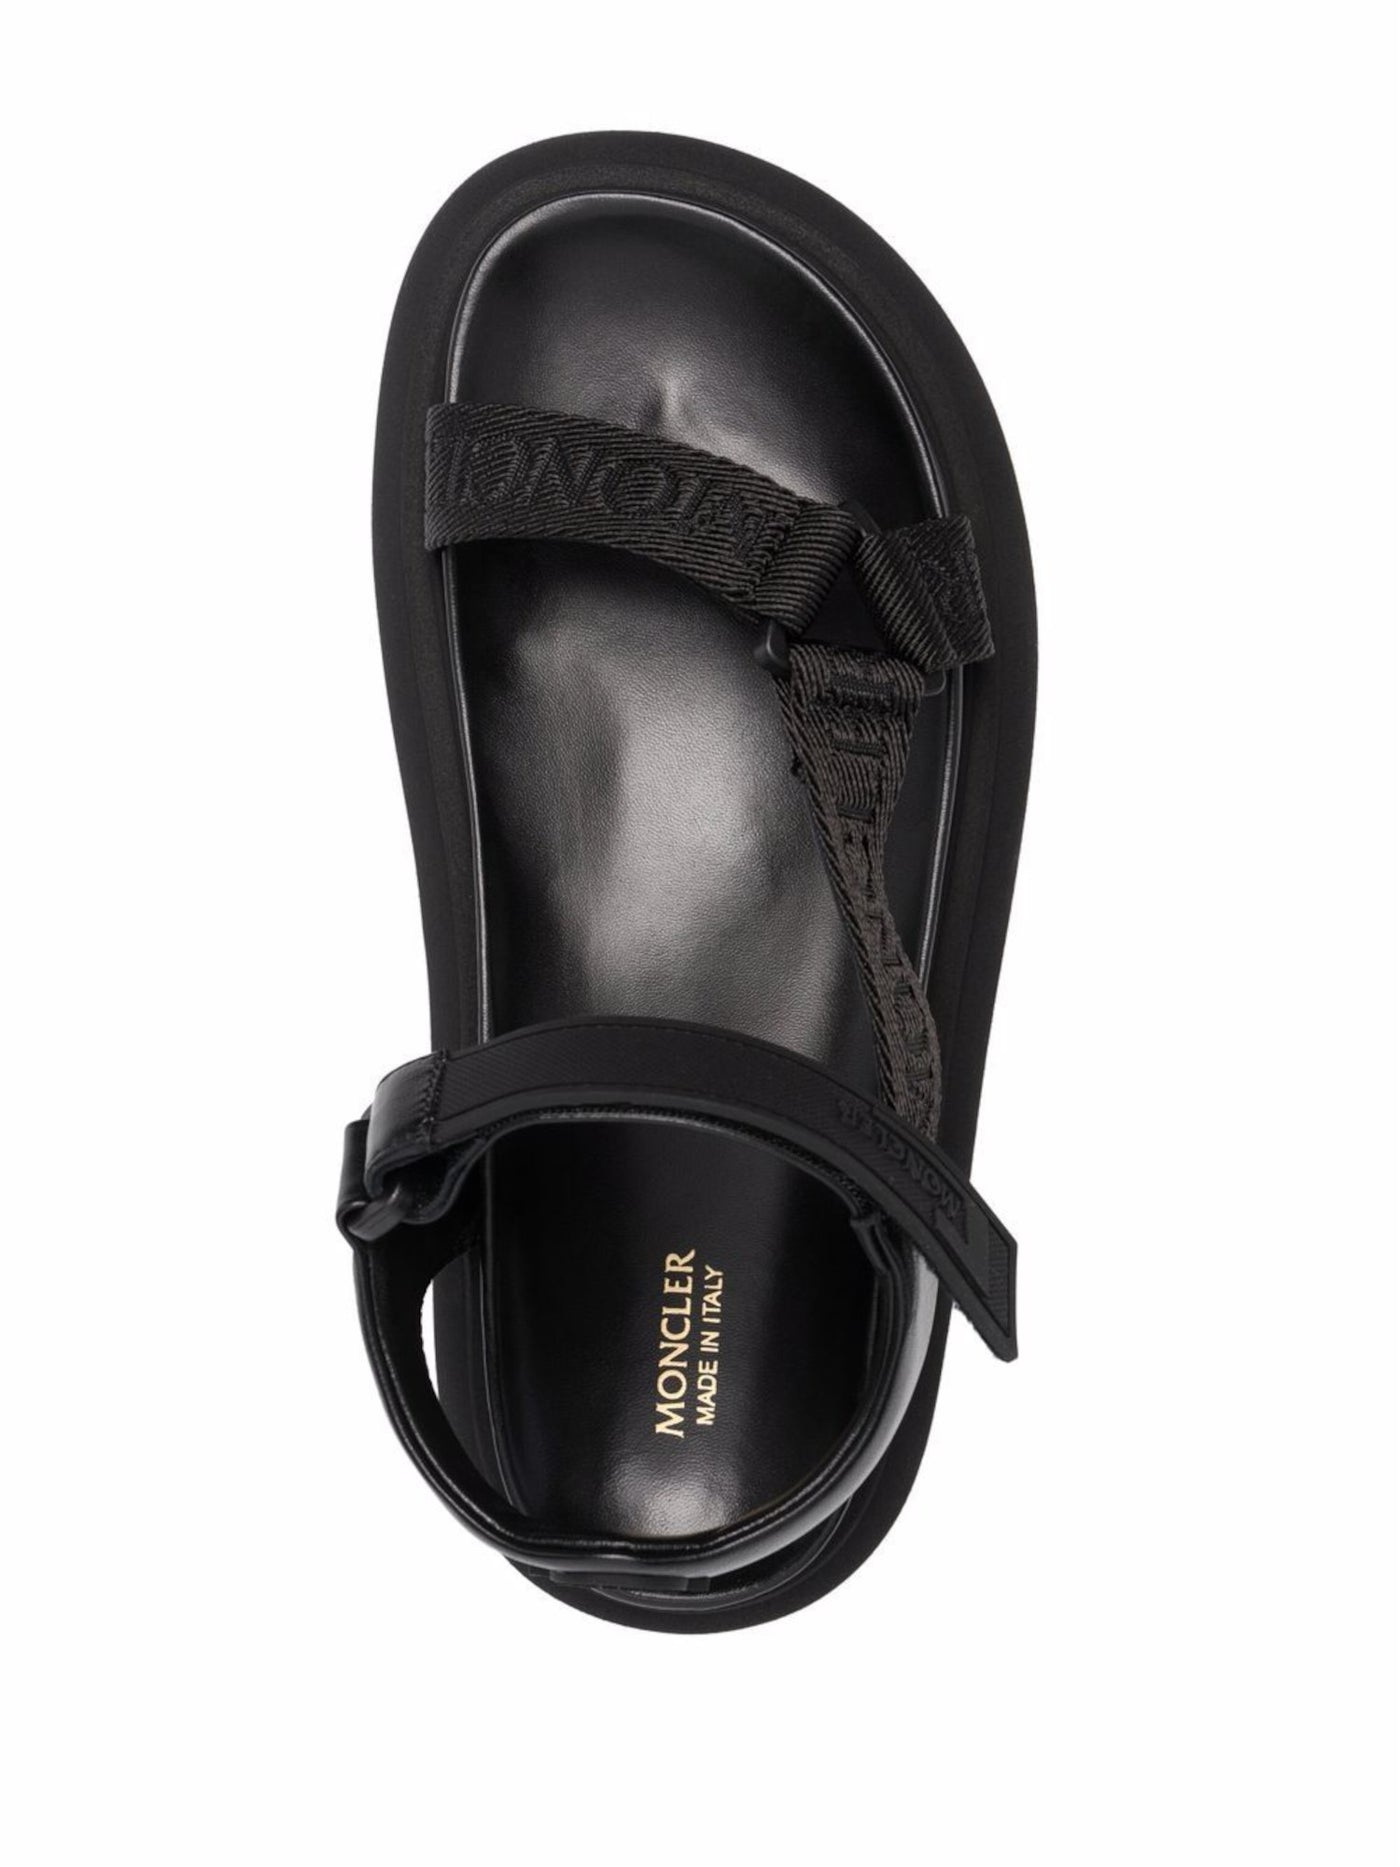 MONCLER Womens Black Logo Asymmetrical Arch Support Catura Round Toe Wedge Sandals 37